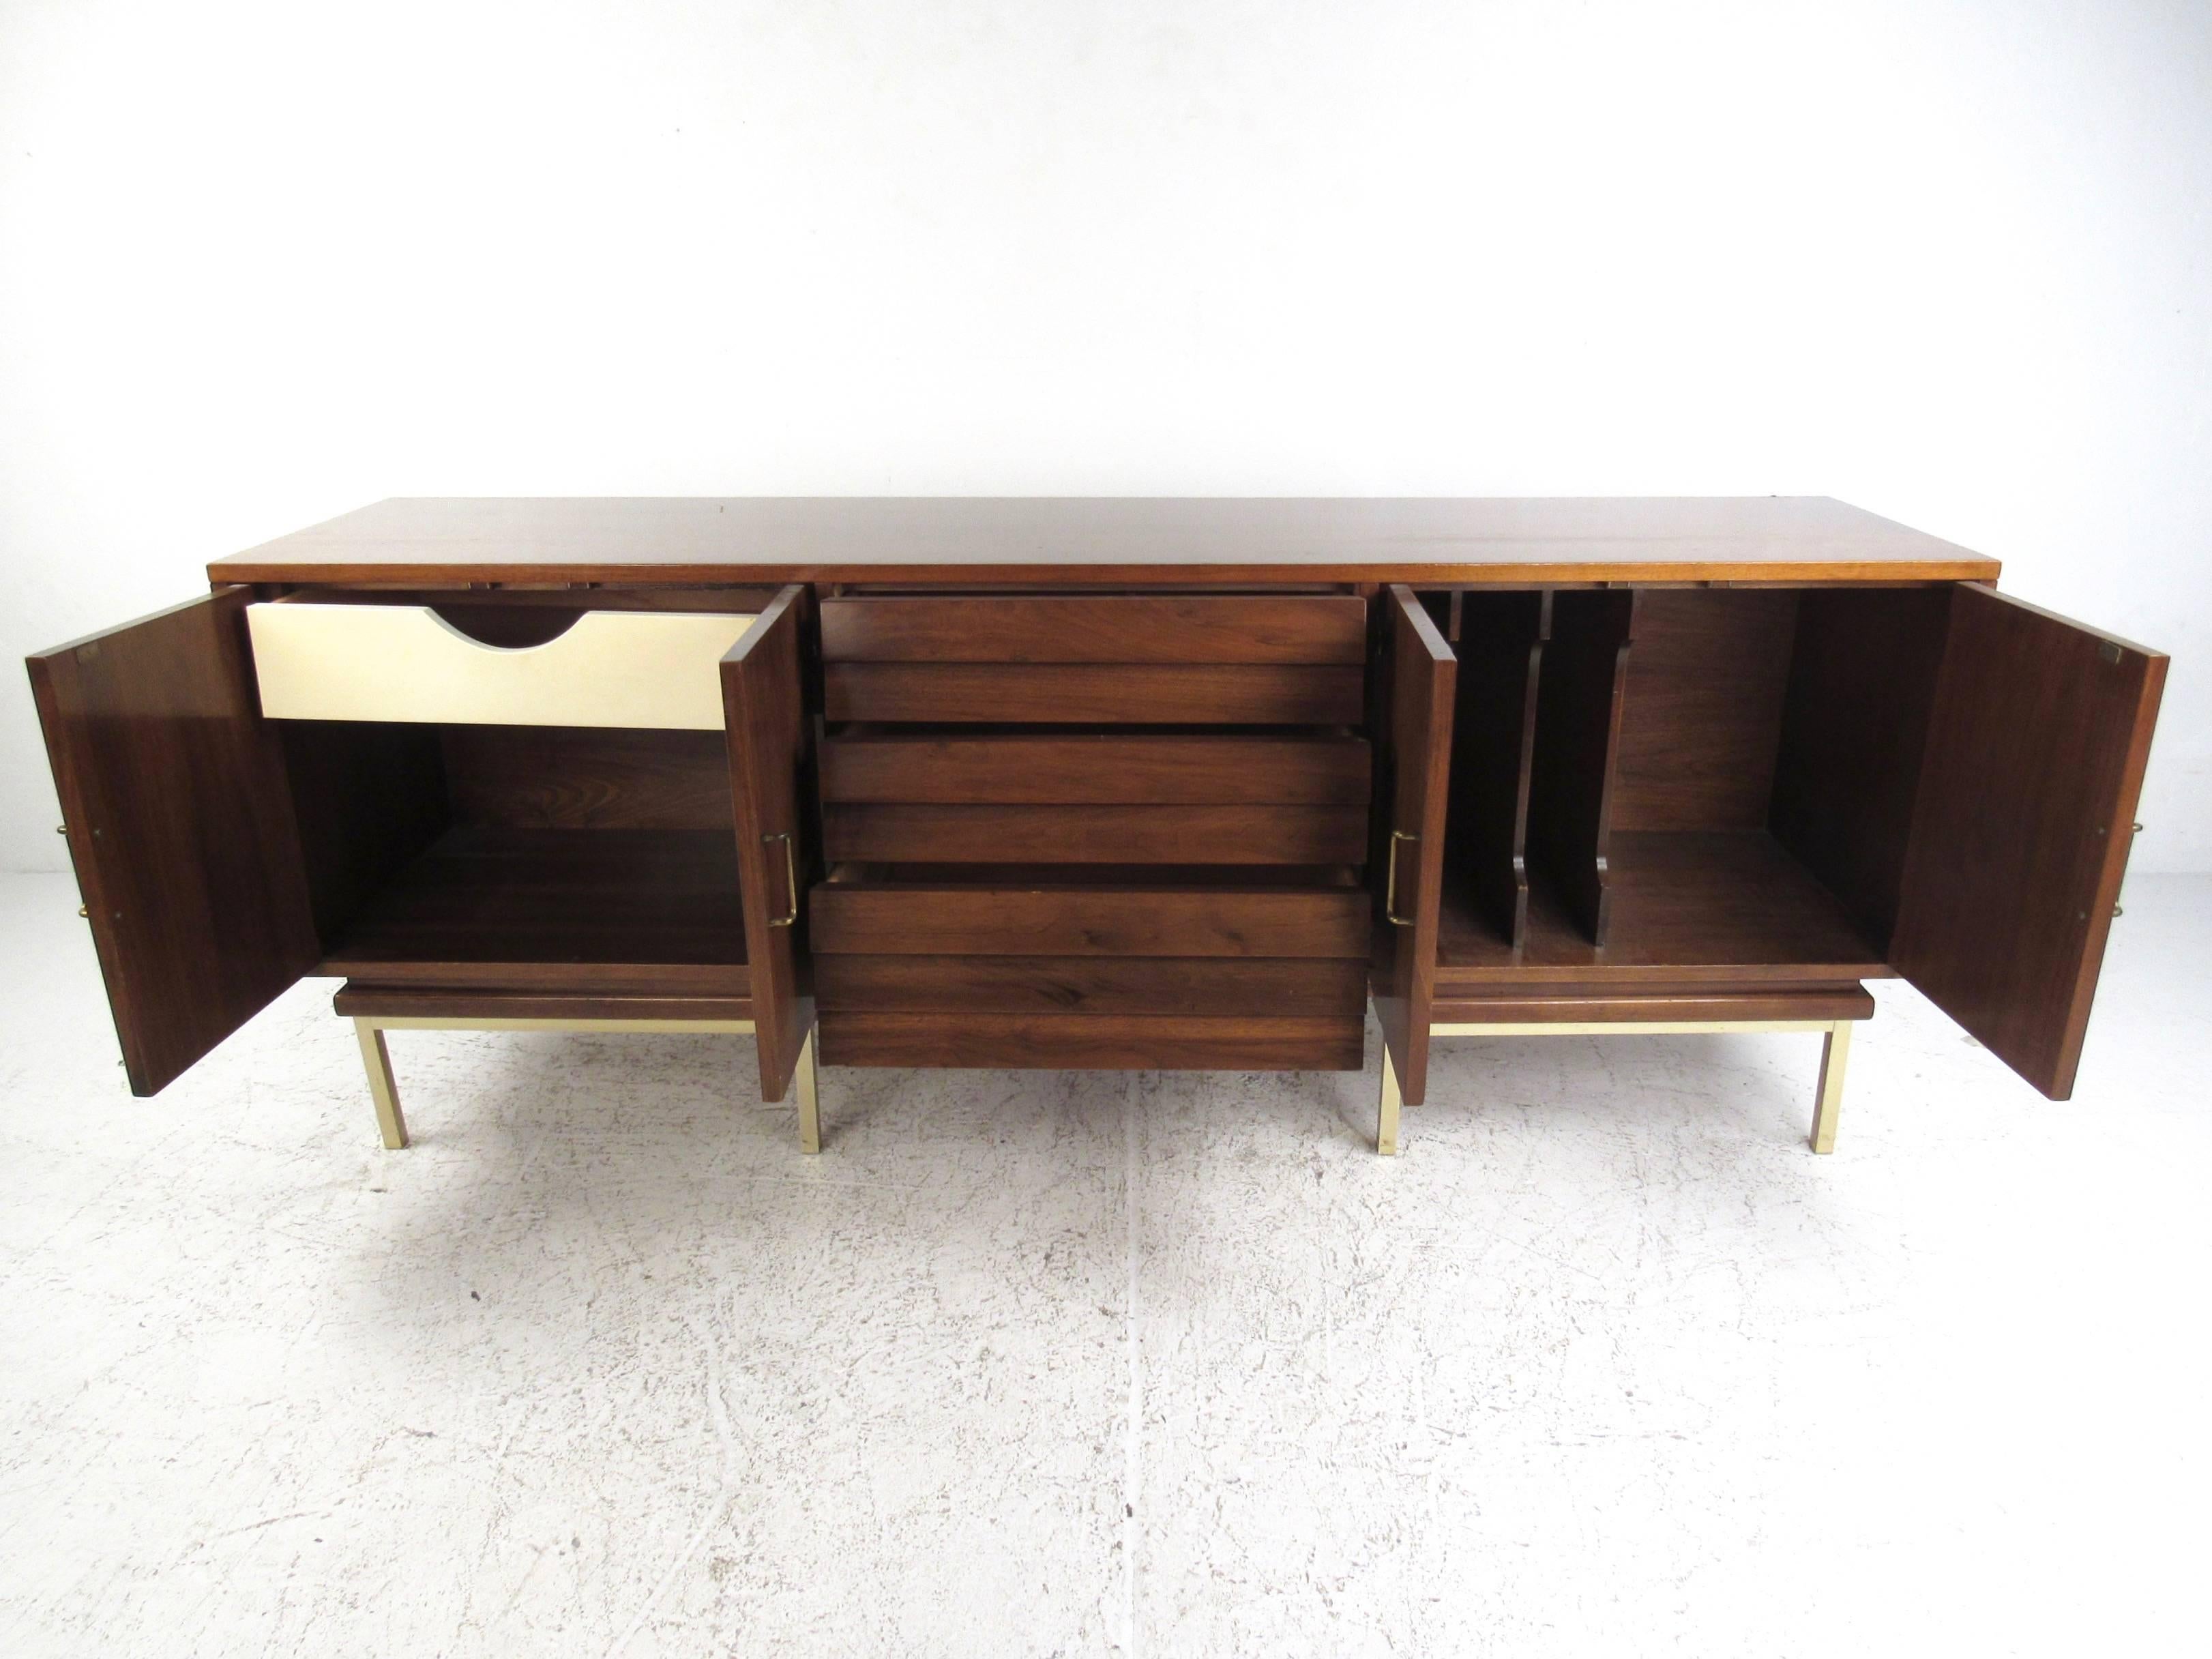 This large scale American walnut sideboard features louvered drawer fronts, brass finish trim and a combination of storage options. Three center drawers are paired with Dual side cabinets for concealed storage. Brass handles and rich vintage walnut